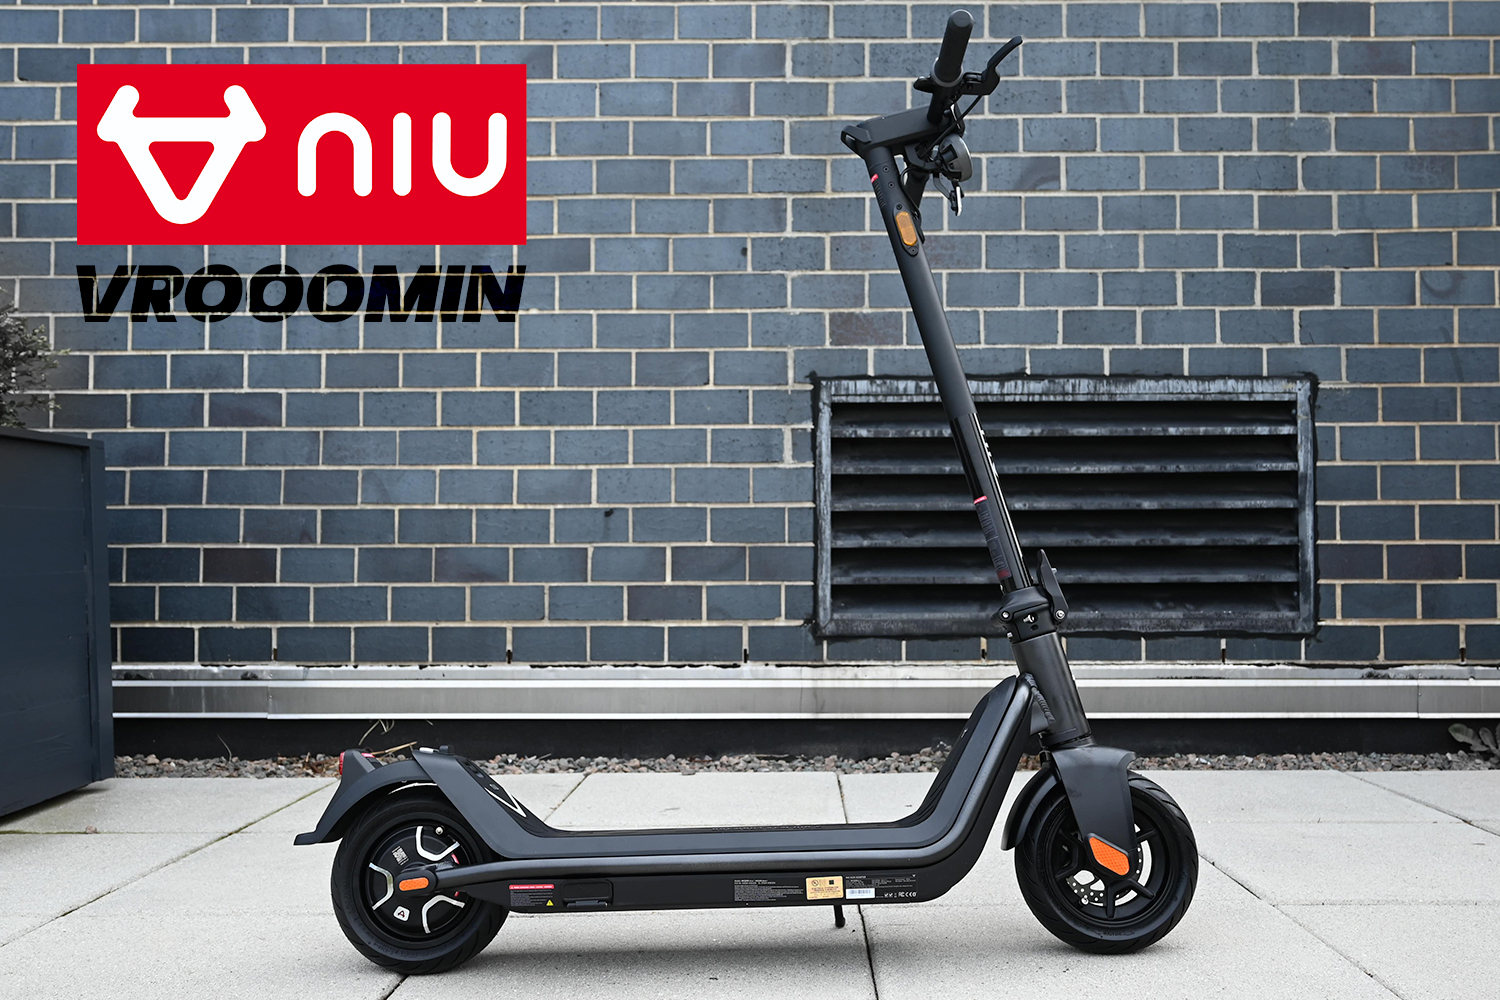 The Amazing NIU KQi3 Pro, Best 20 MPH Electric Scooter for NYC